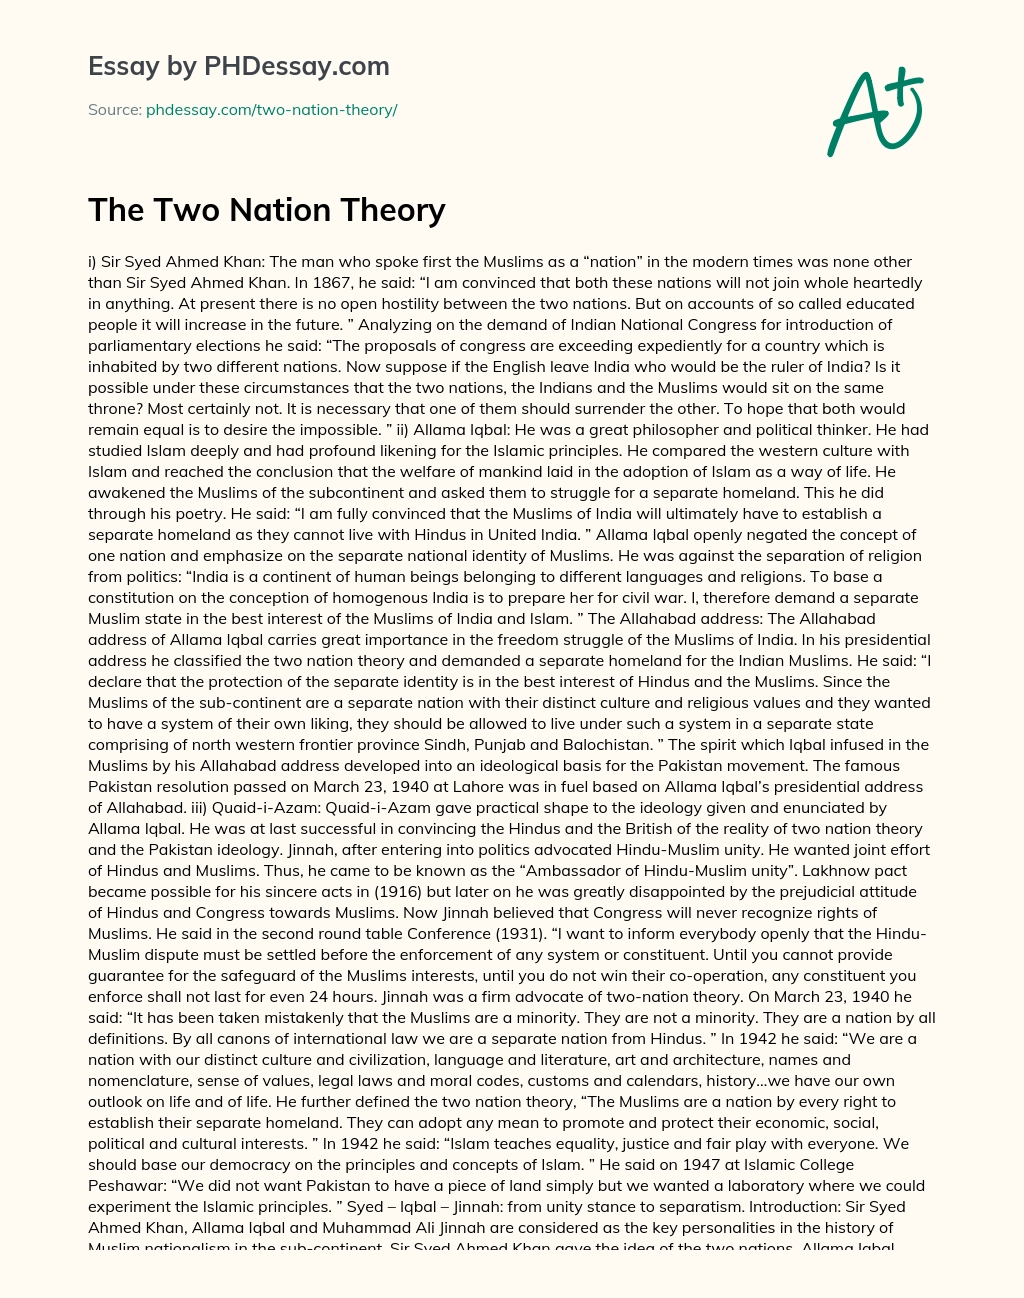 essay on two nation theory